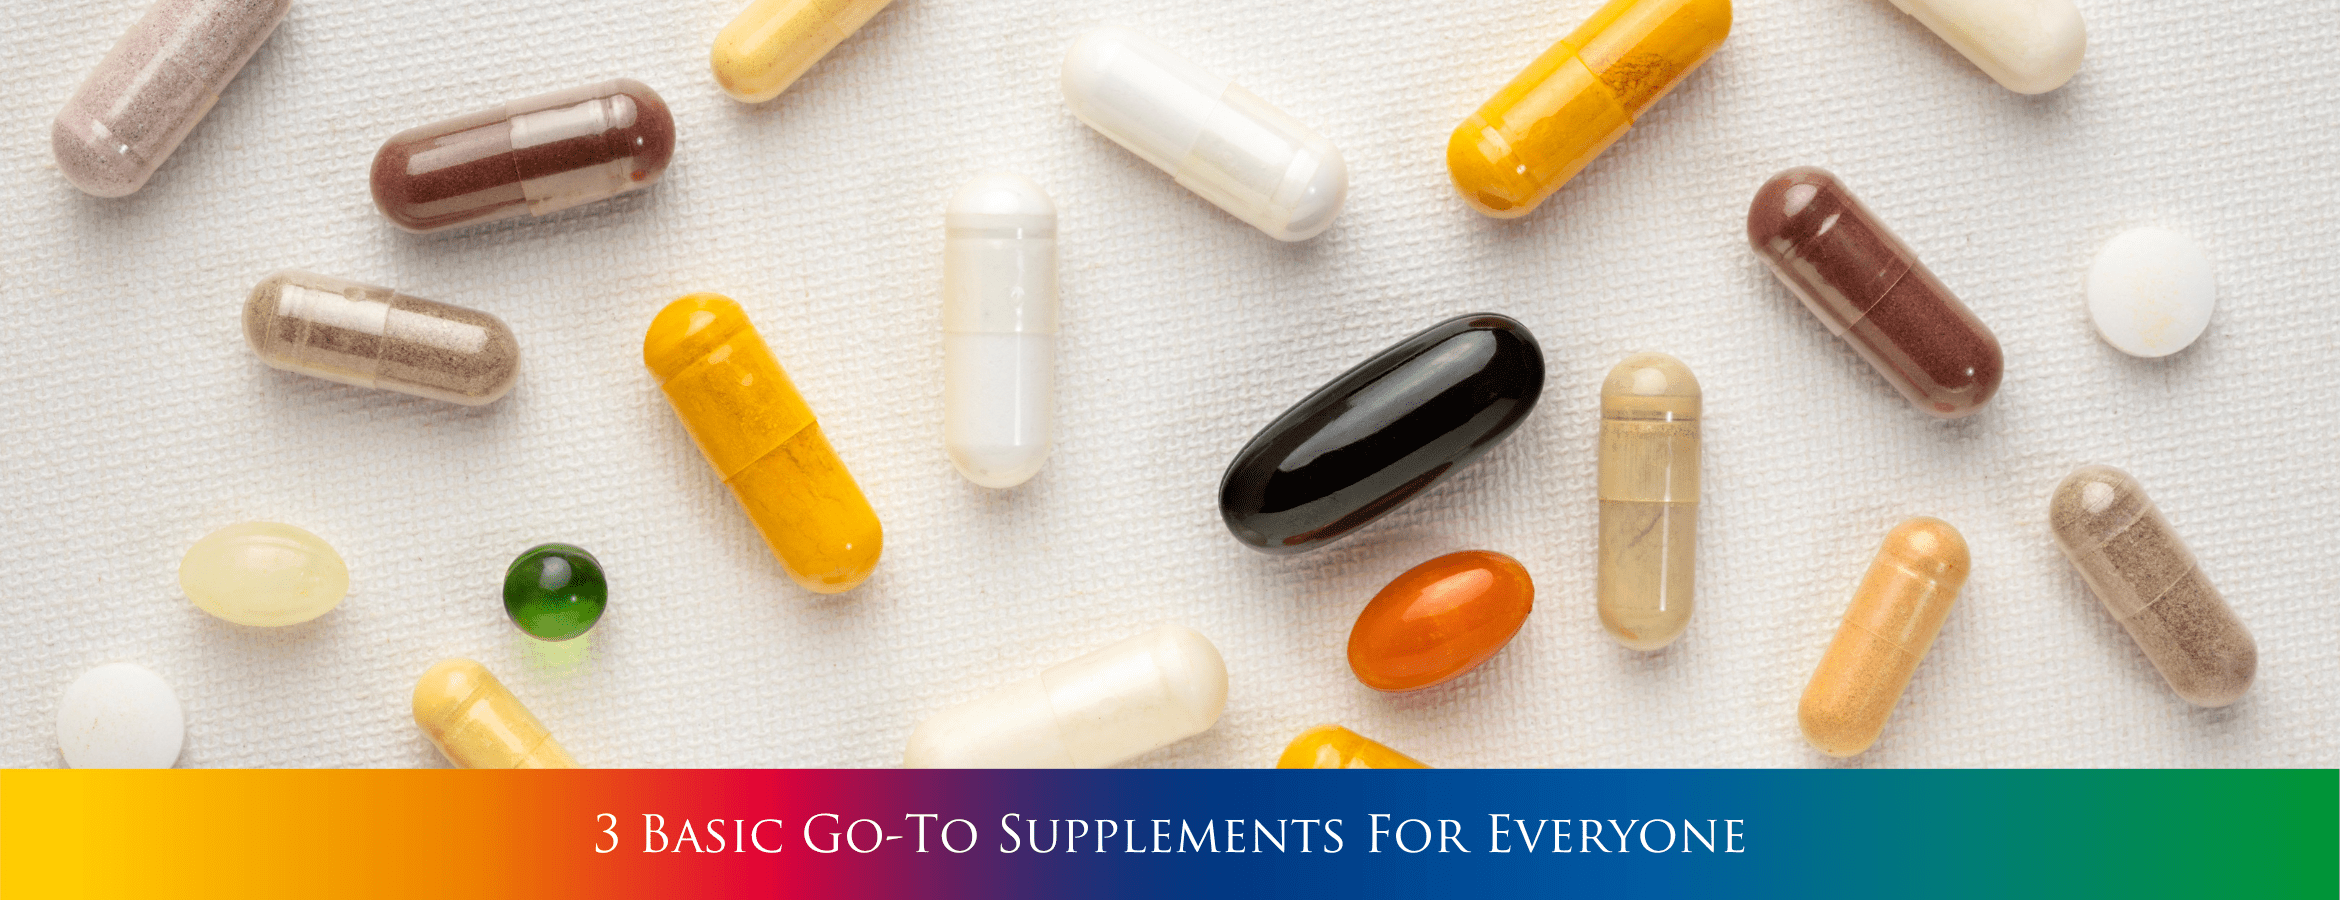 3 Basic Go-To Supplements For Everyone!